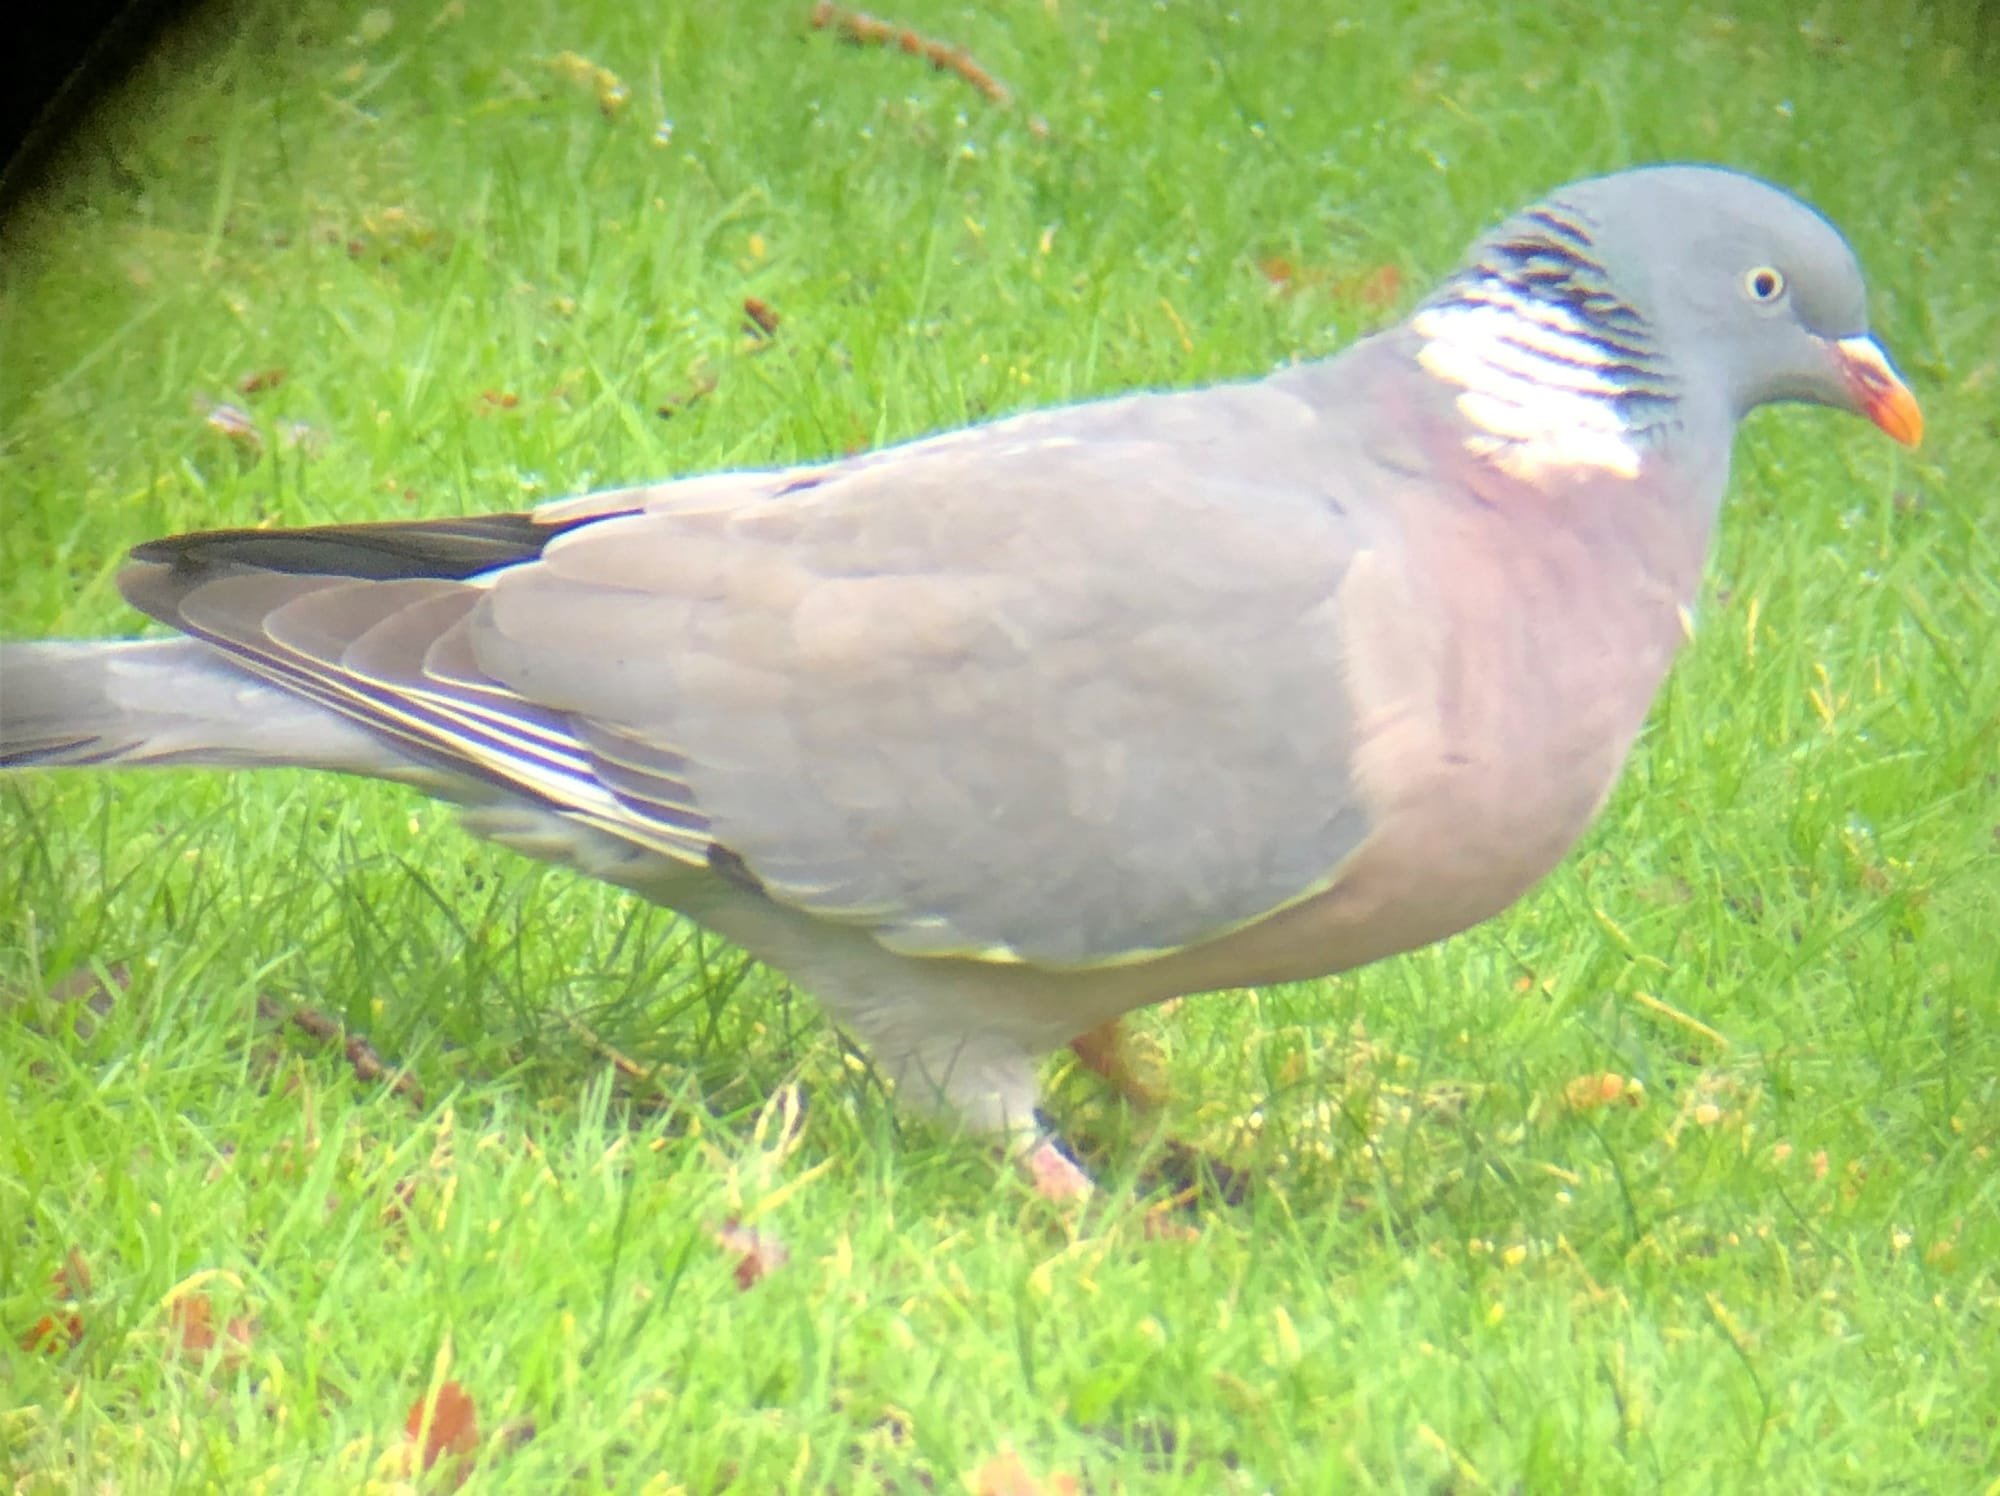 Wood pigeons are very common